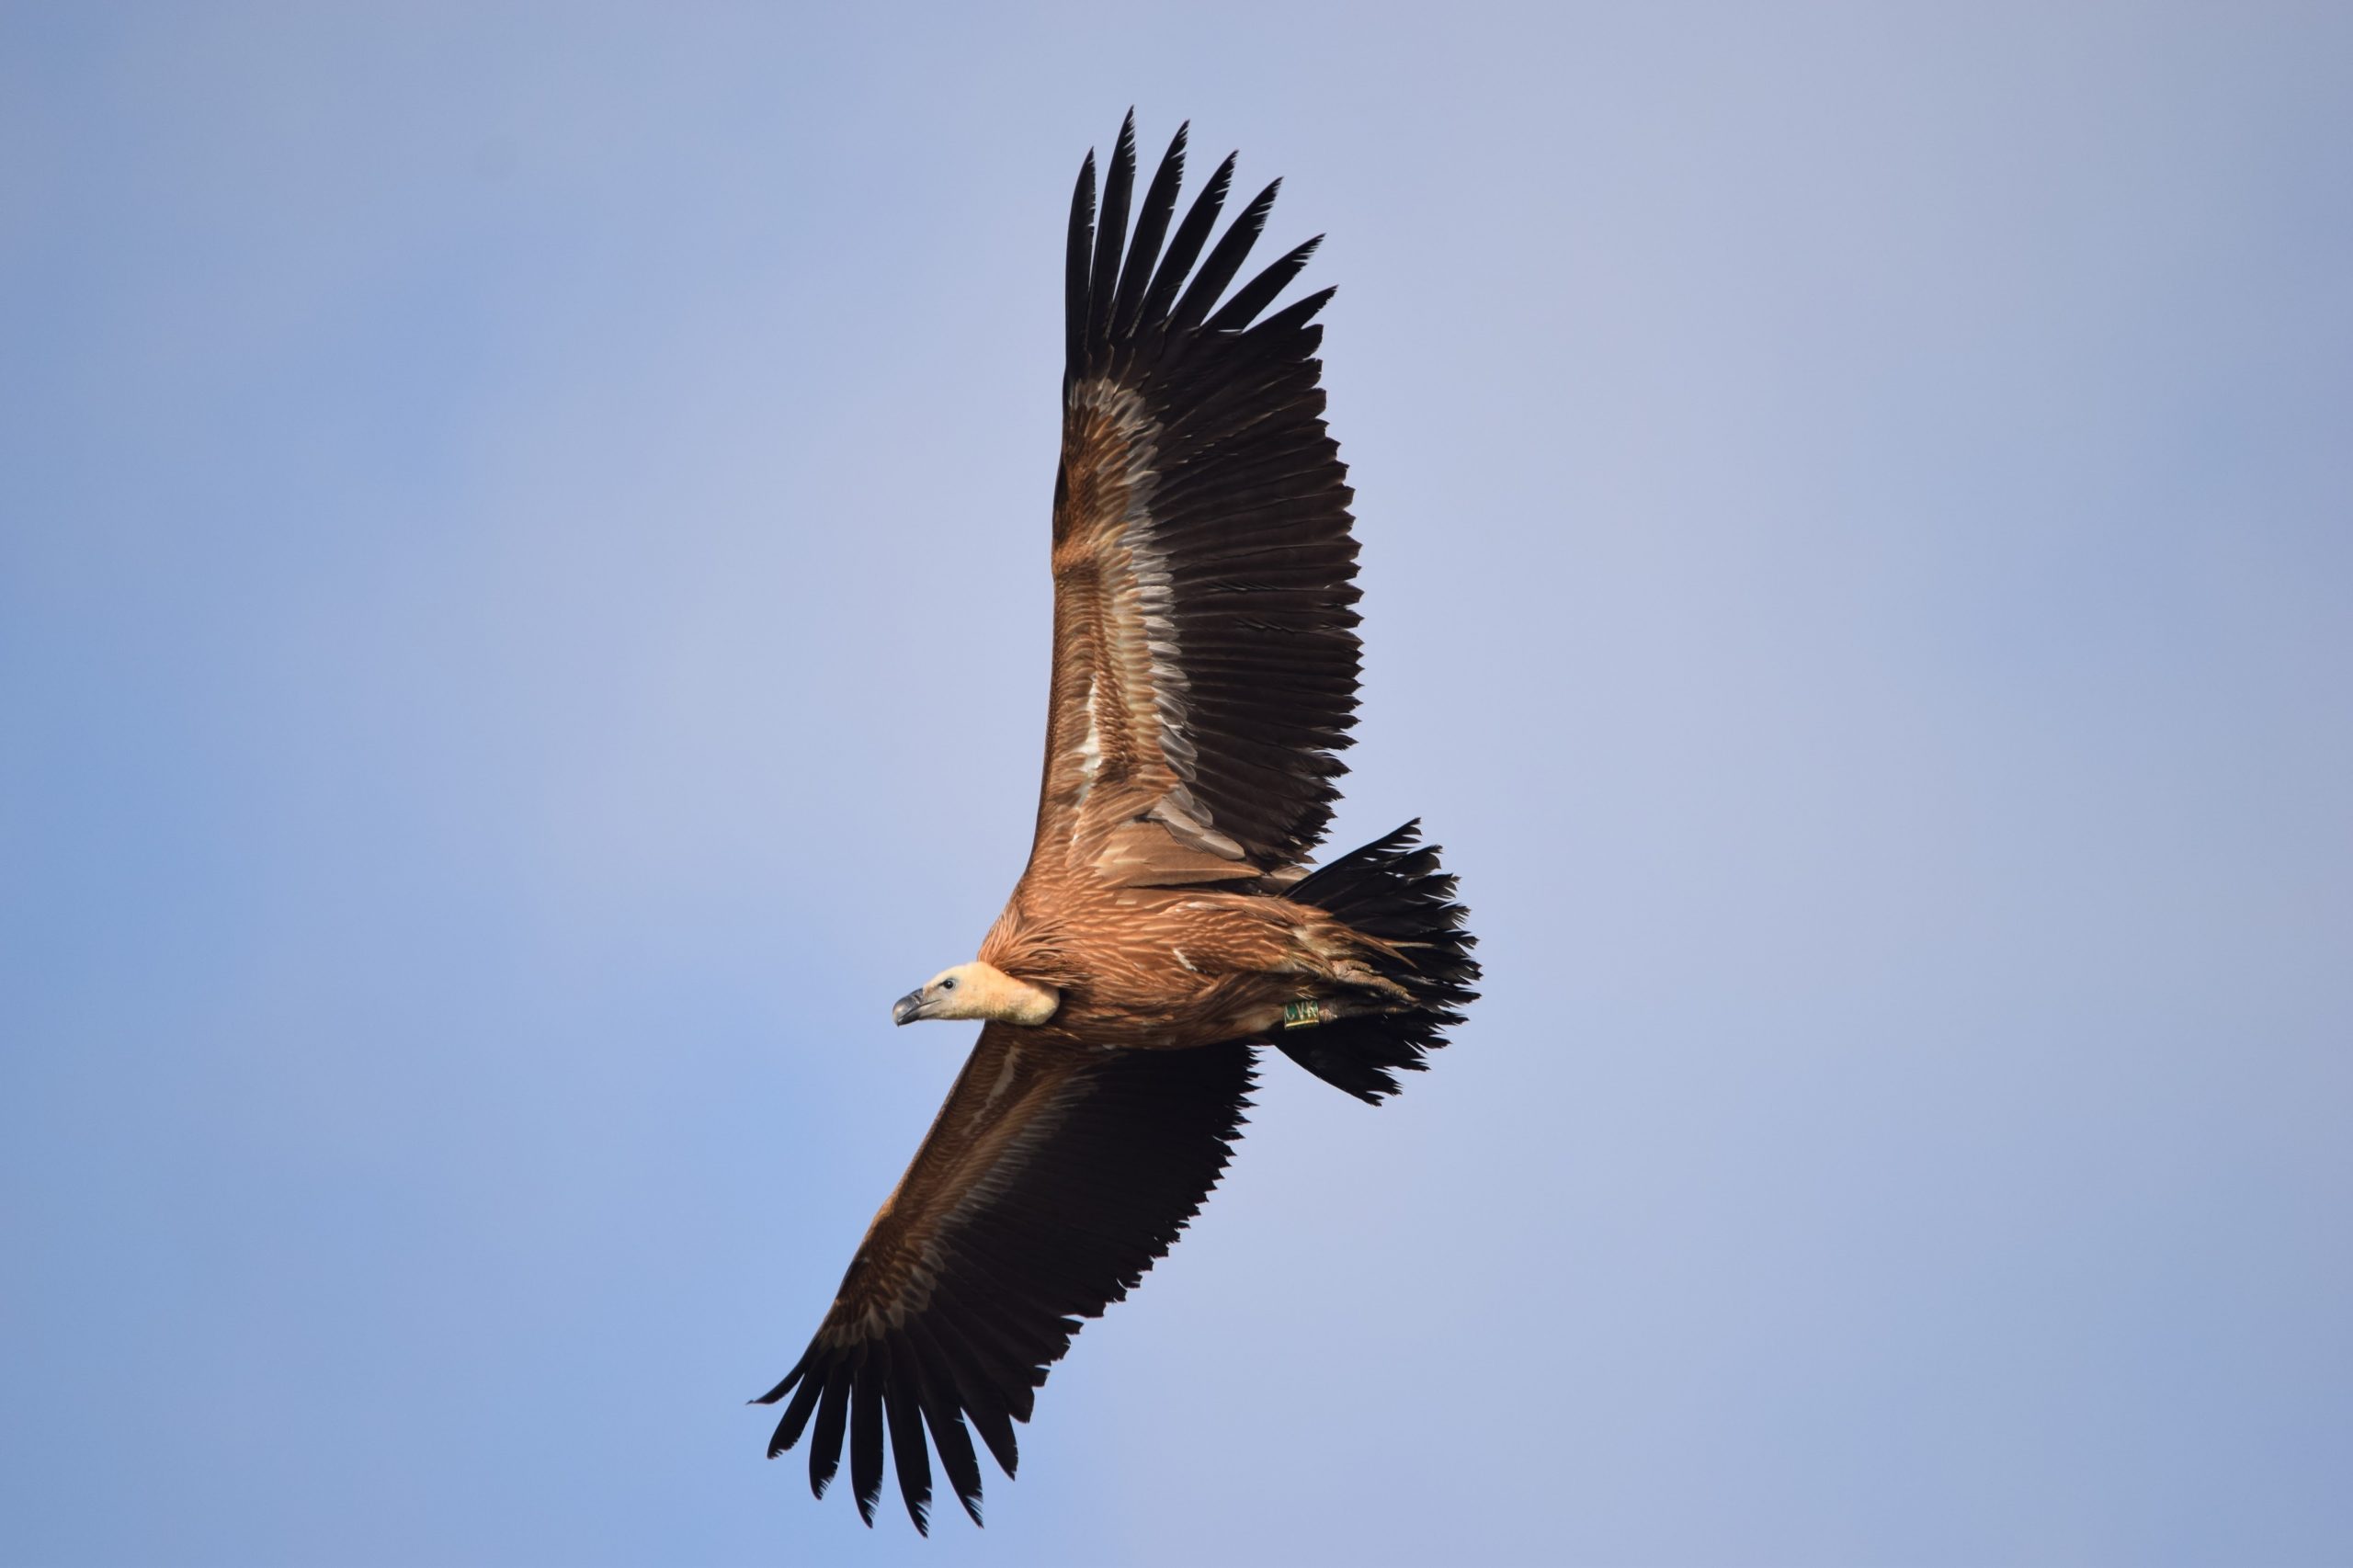 LIFE SUPport – Securing a future for Griffon Vultures in Croatia